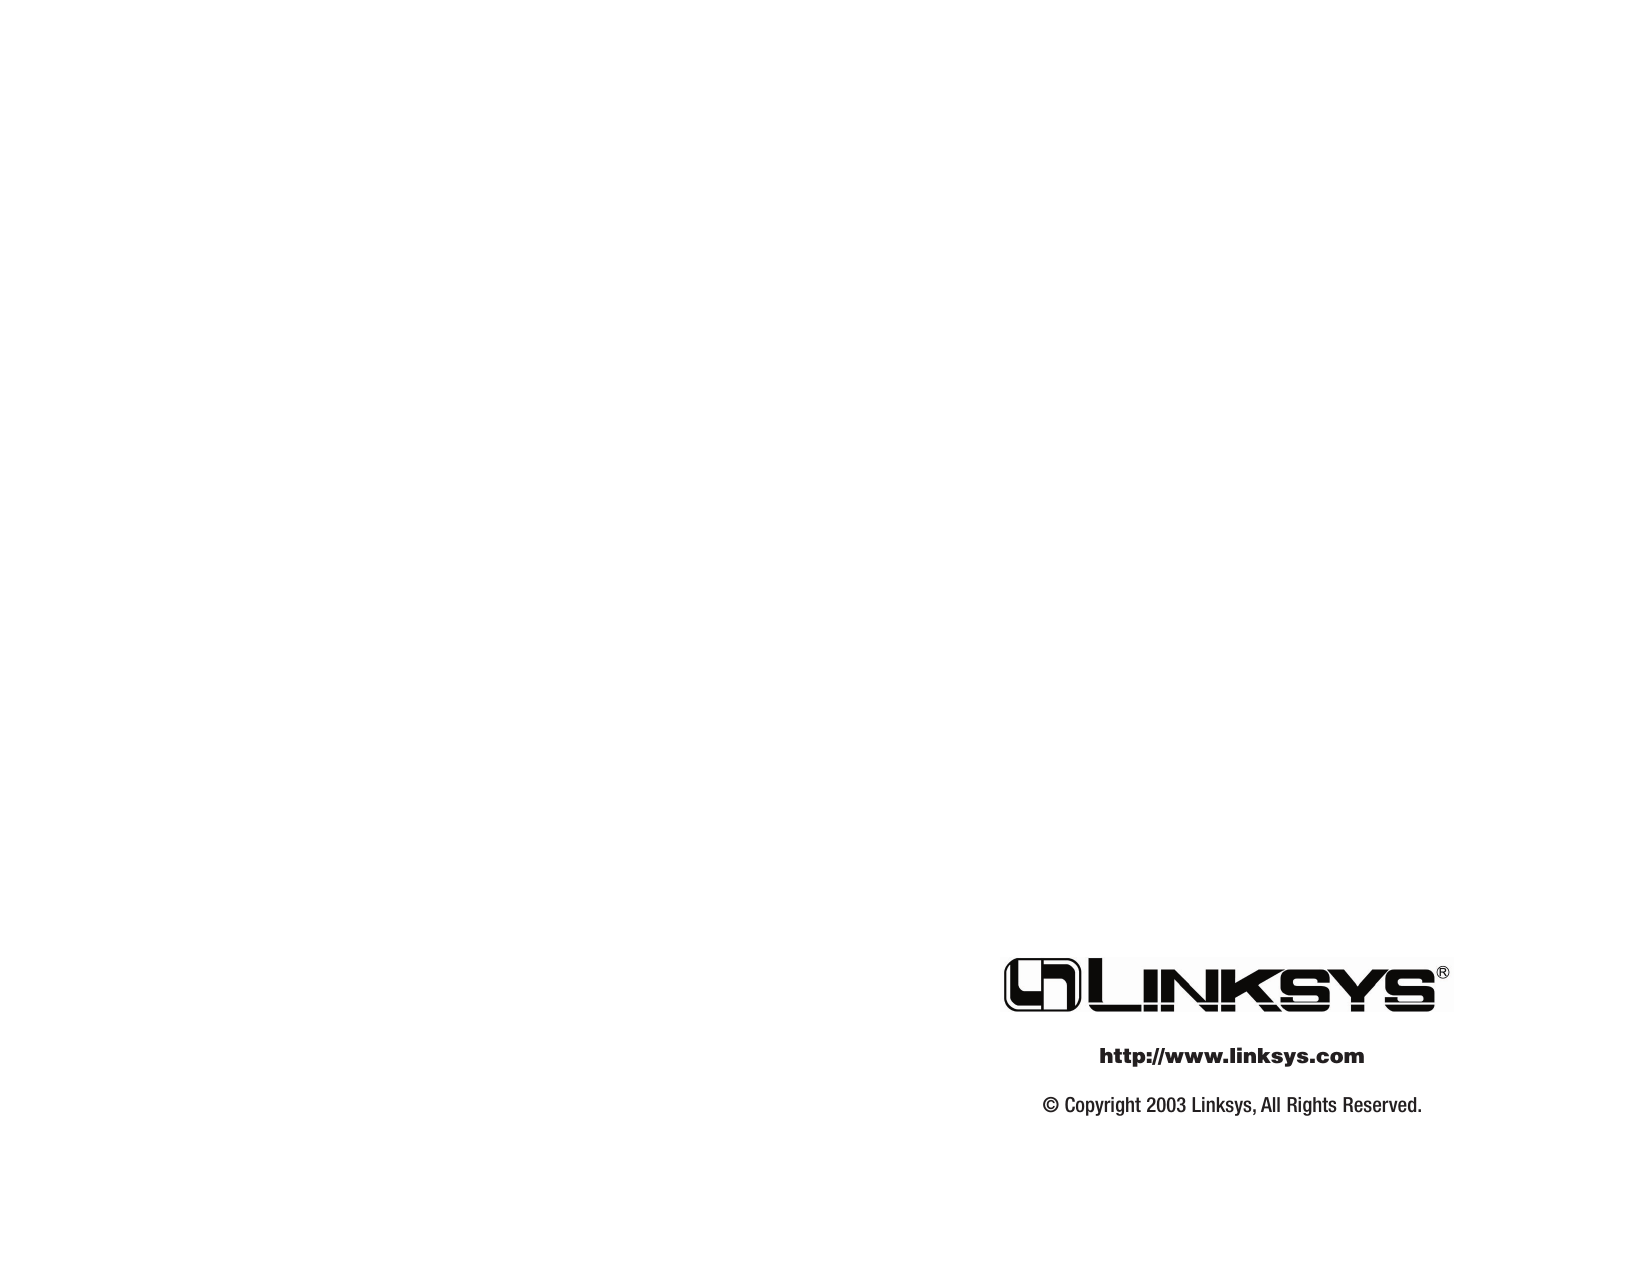 © Copyright 2003 Linksys, All Rights Reserved.http://www.linksys.com